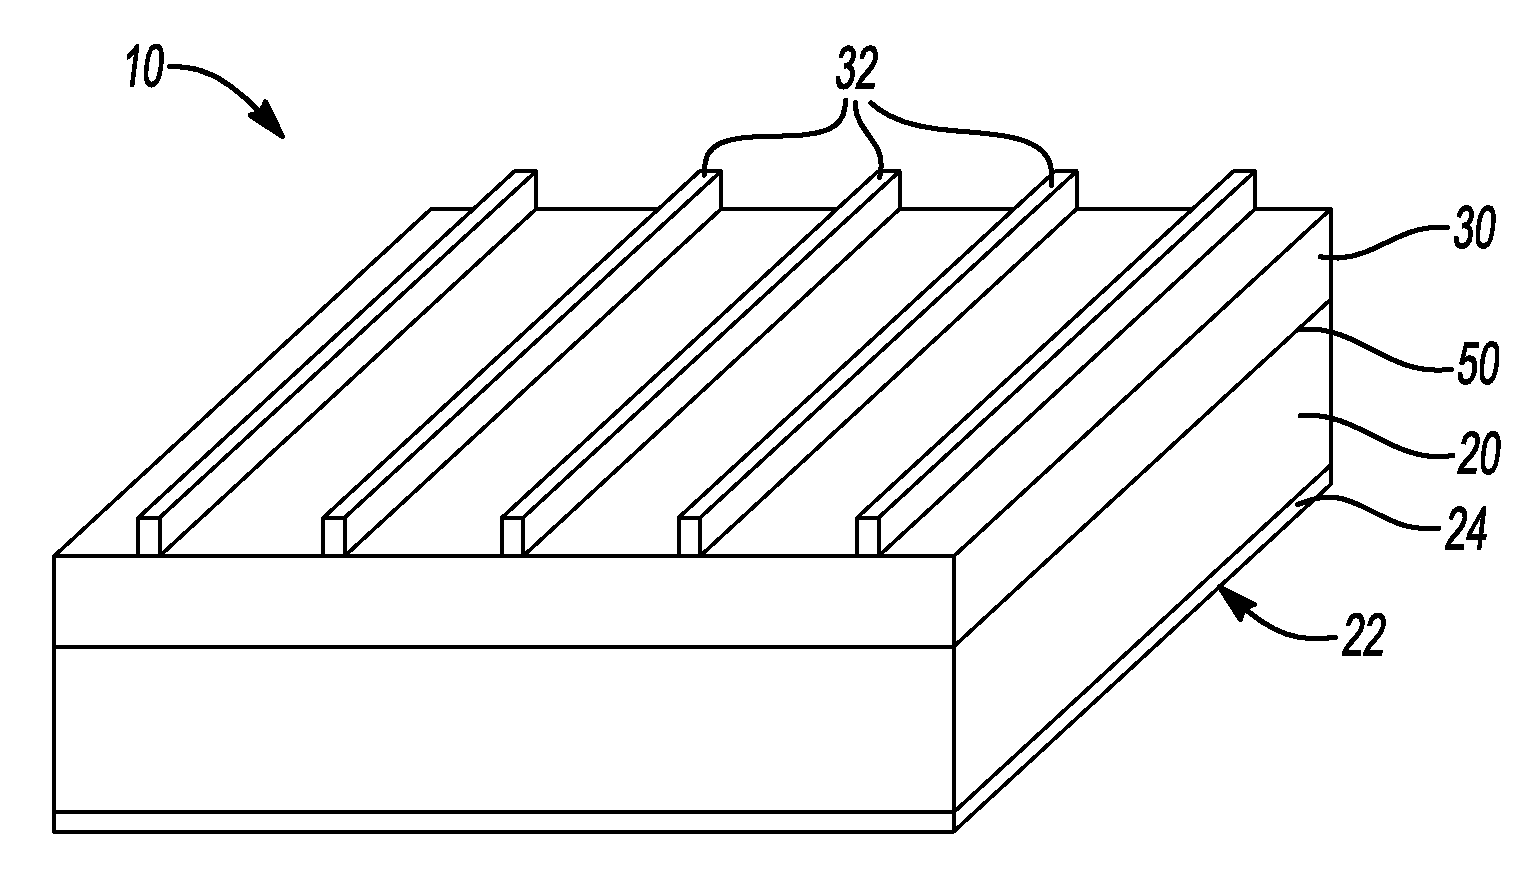 Silicon-based solar cell with eutectic composition